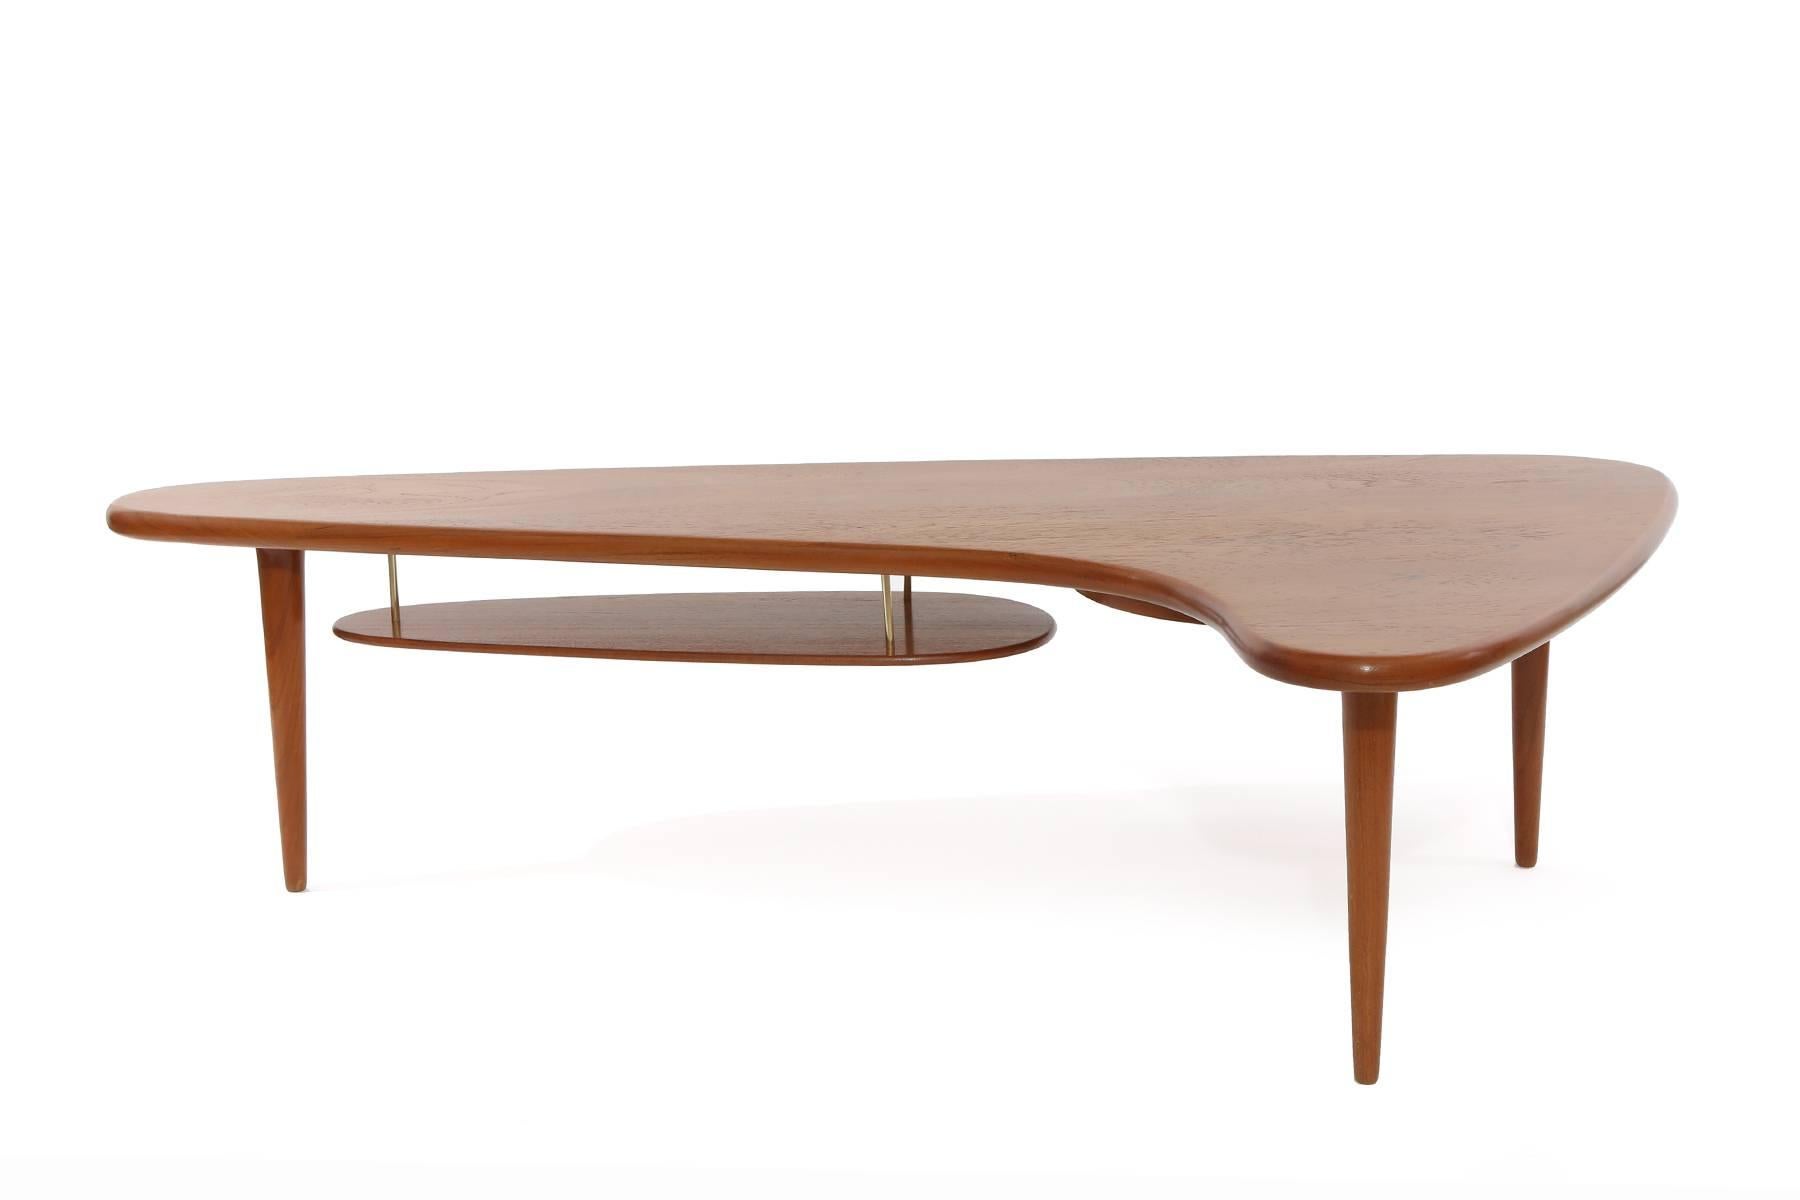 Free-form coffee table from Denmark, circa late 1950s. This example has a solid teak top and suspended solid teak second tier. It has a pull out black laminate circular section and brass accents. It has been newly and impeccably refinished.